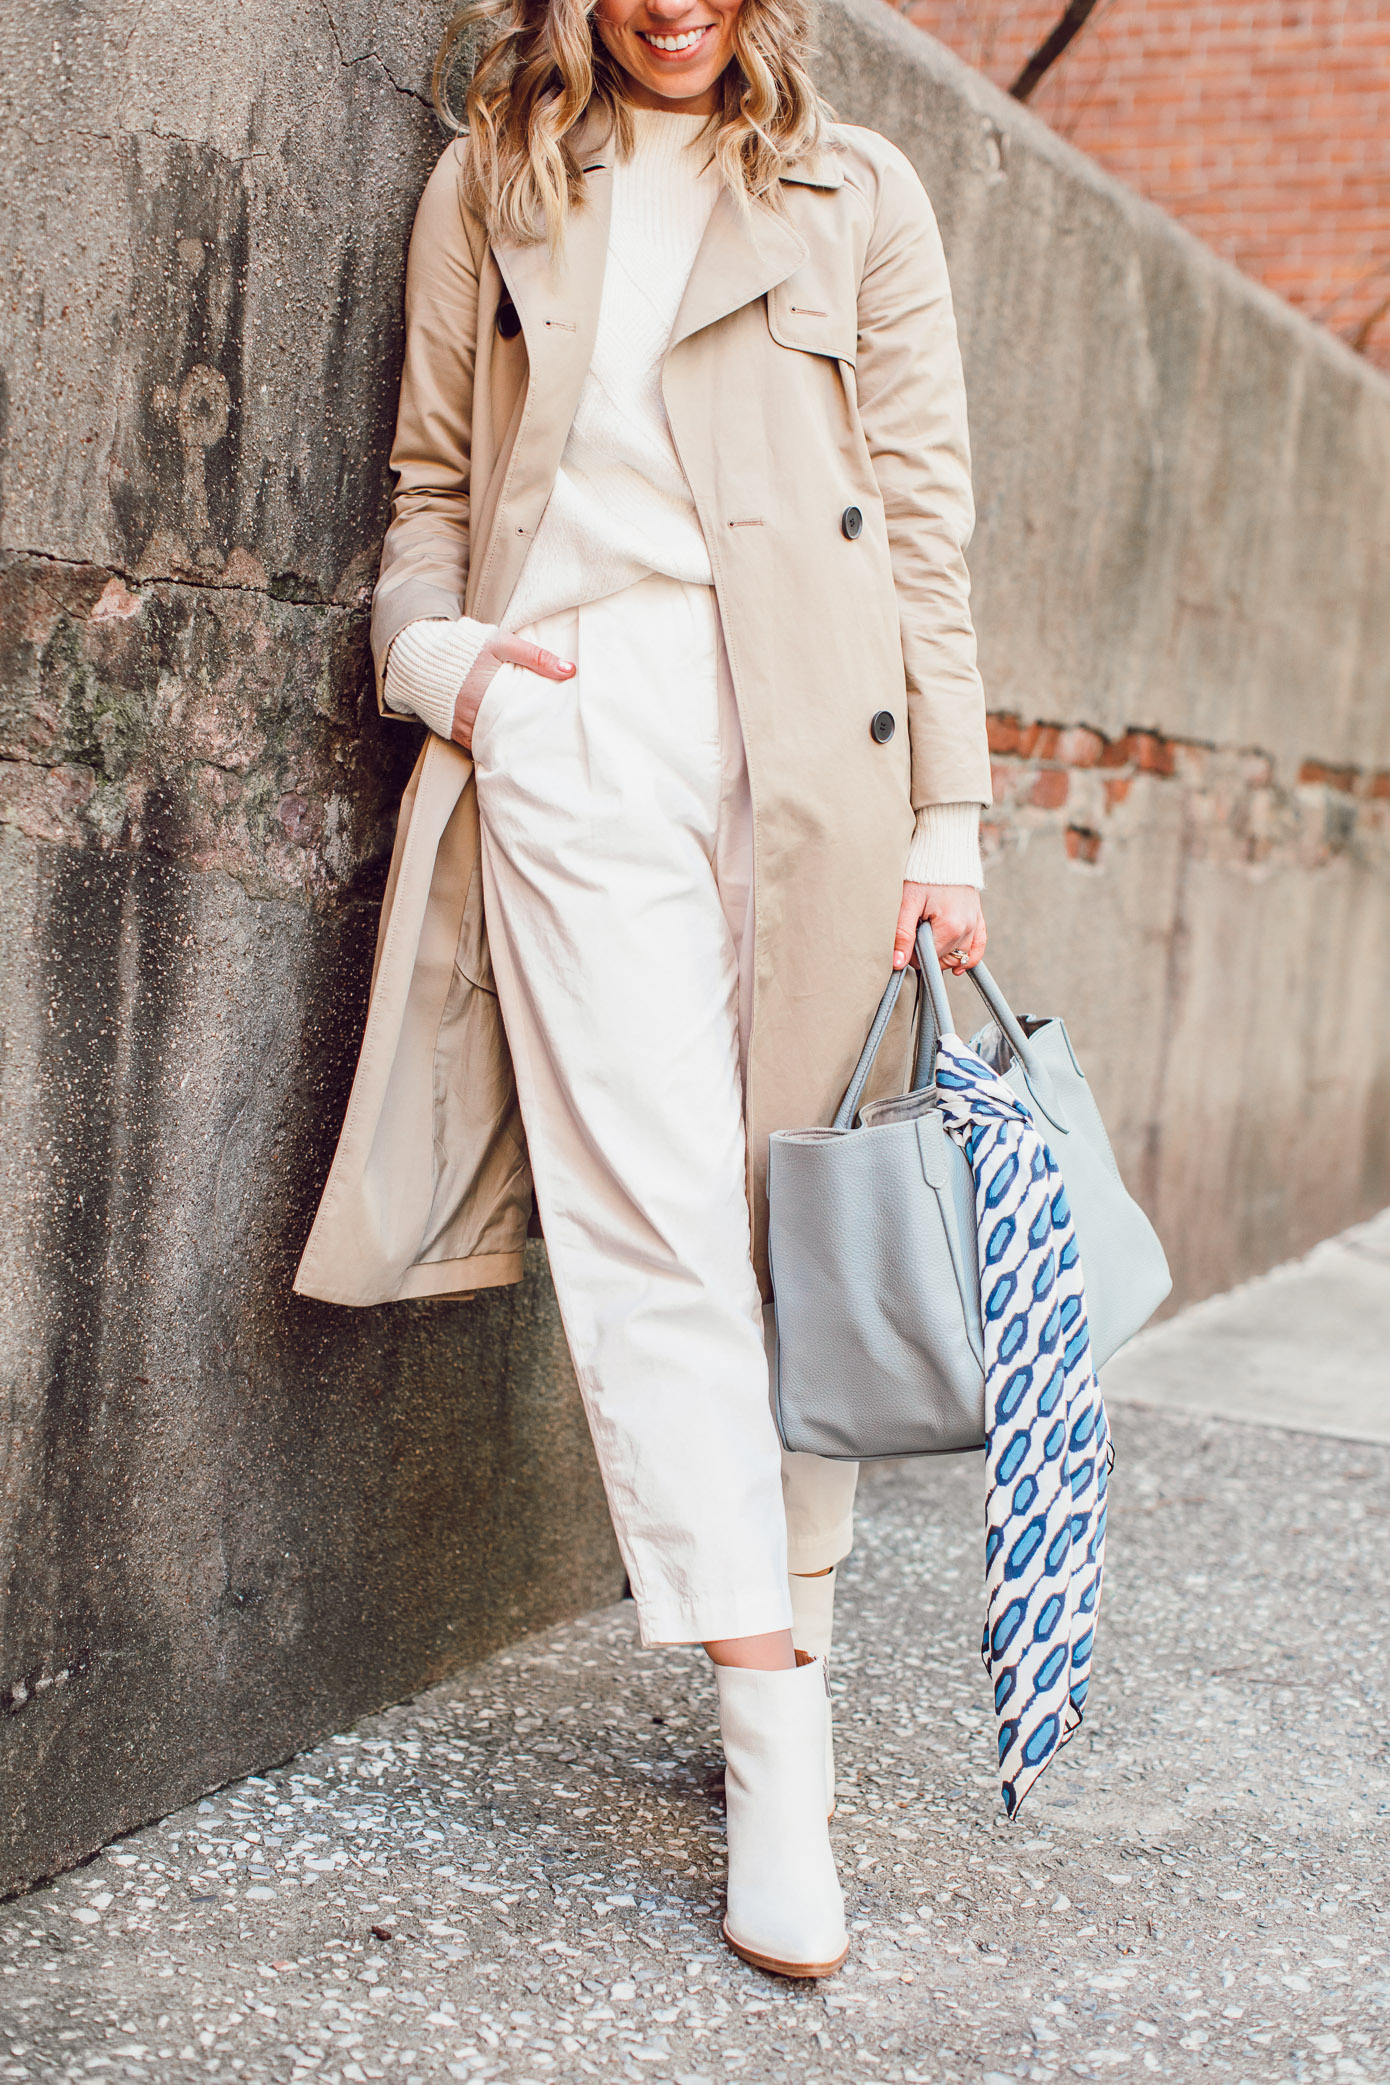 Winter White Workwear Outfit Idea, Workwear Style | Trench Coat, White Sweater, White Slouchy Chinos, White Booties featured on Louella Reese Life & Style Blog